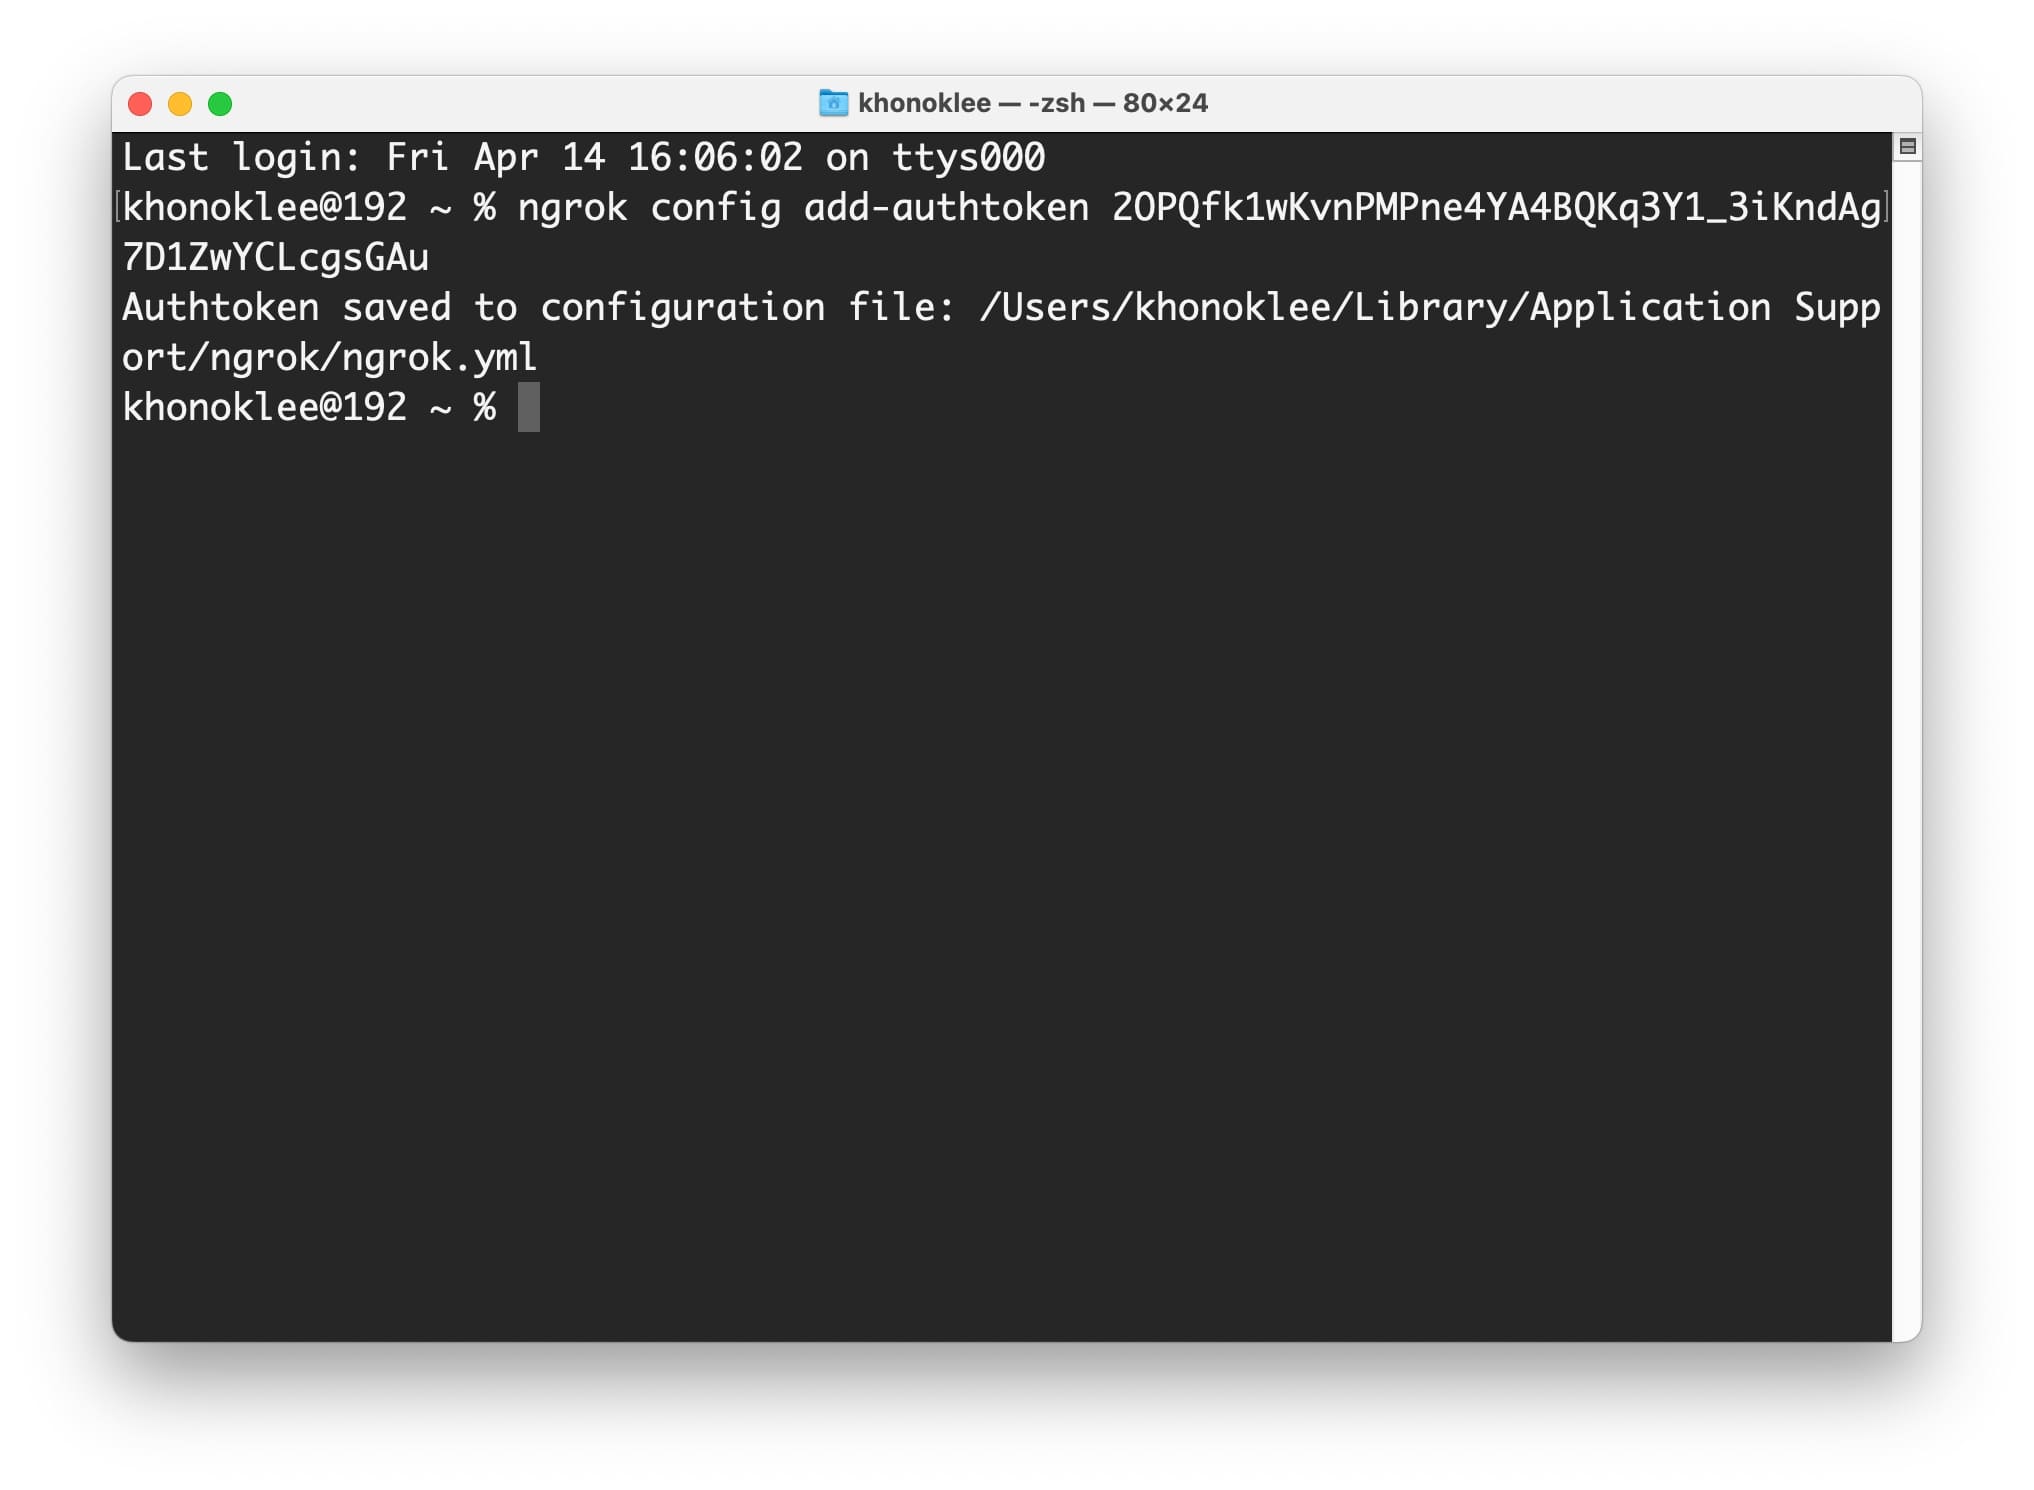 Paste your command line into Terminal.